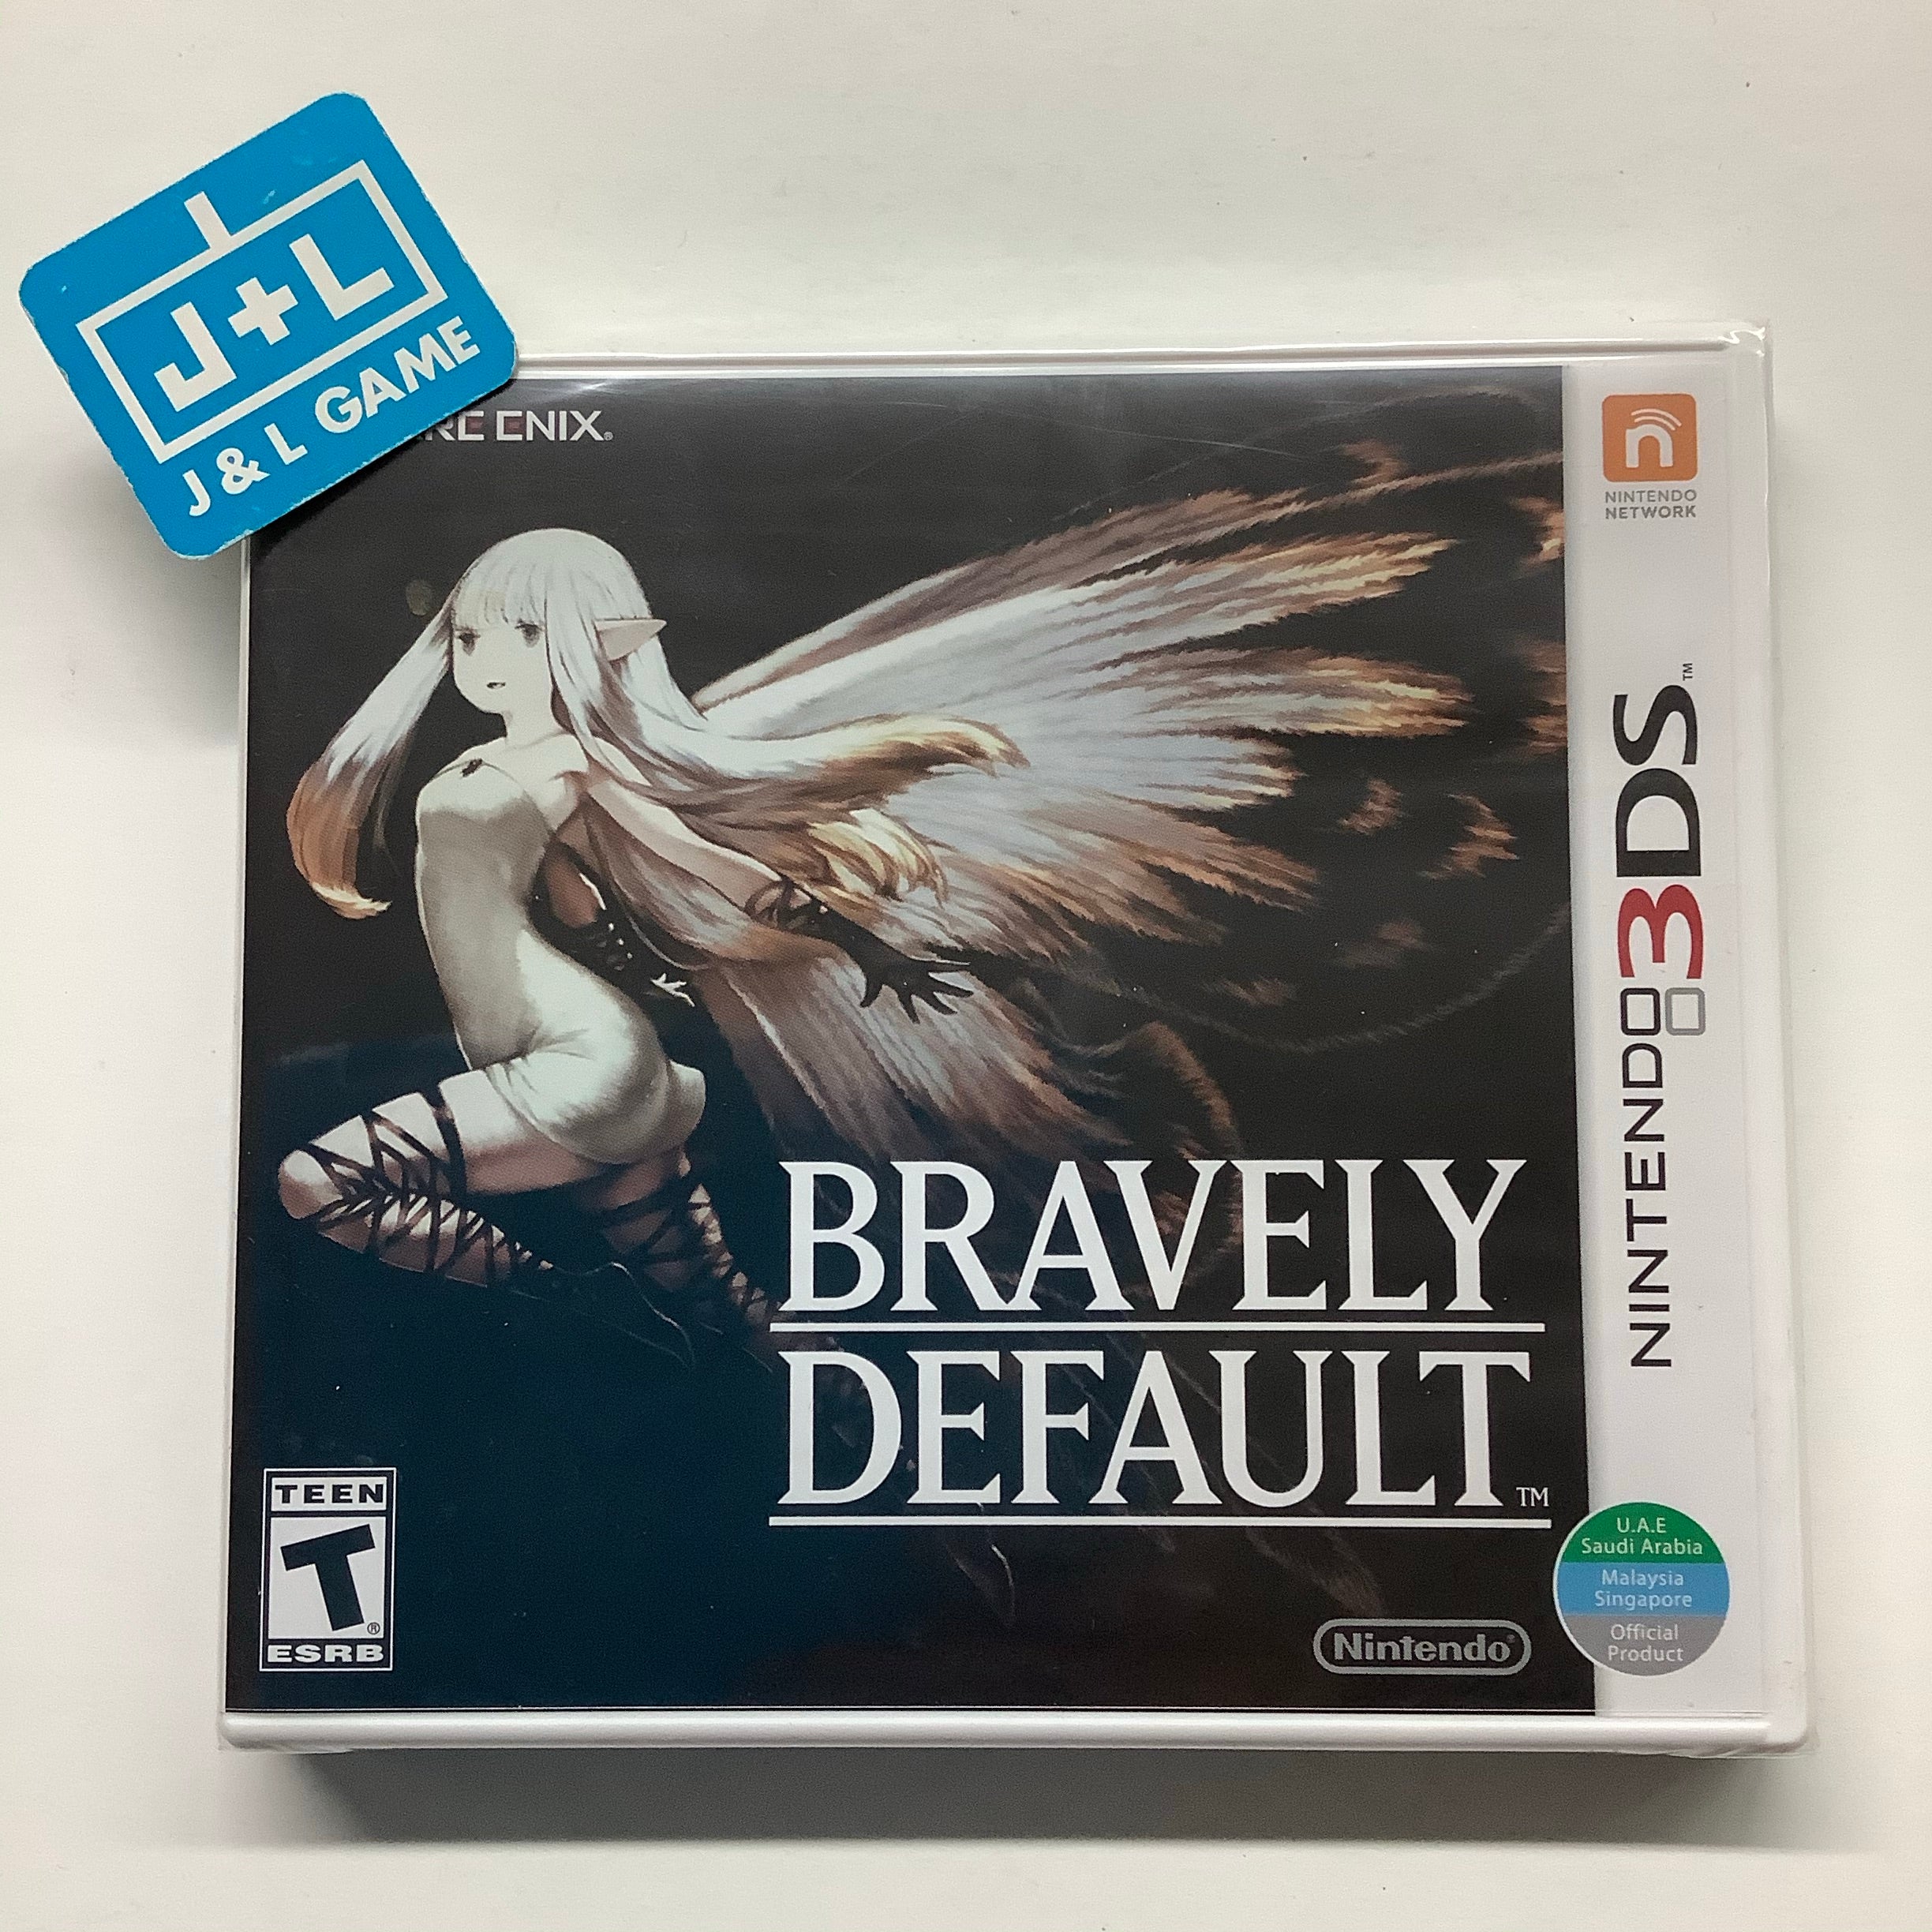 Trader Games - BRAVELY SECOND END LAYER COLLECTOR 3DS FR NEW on